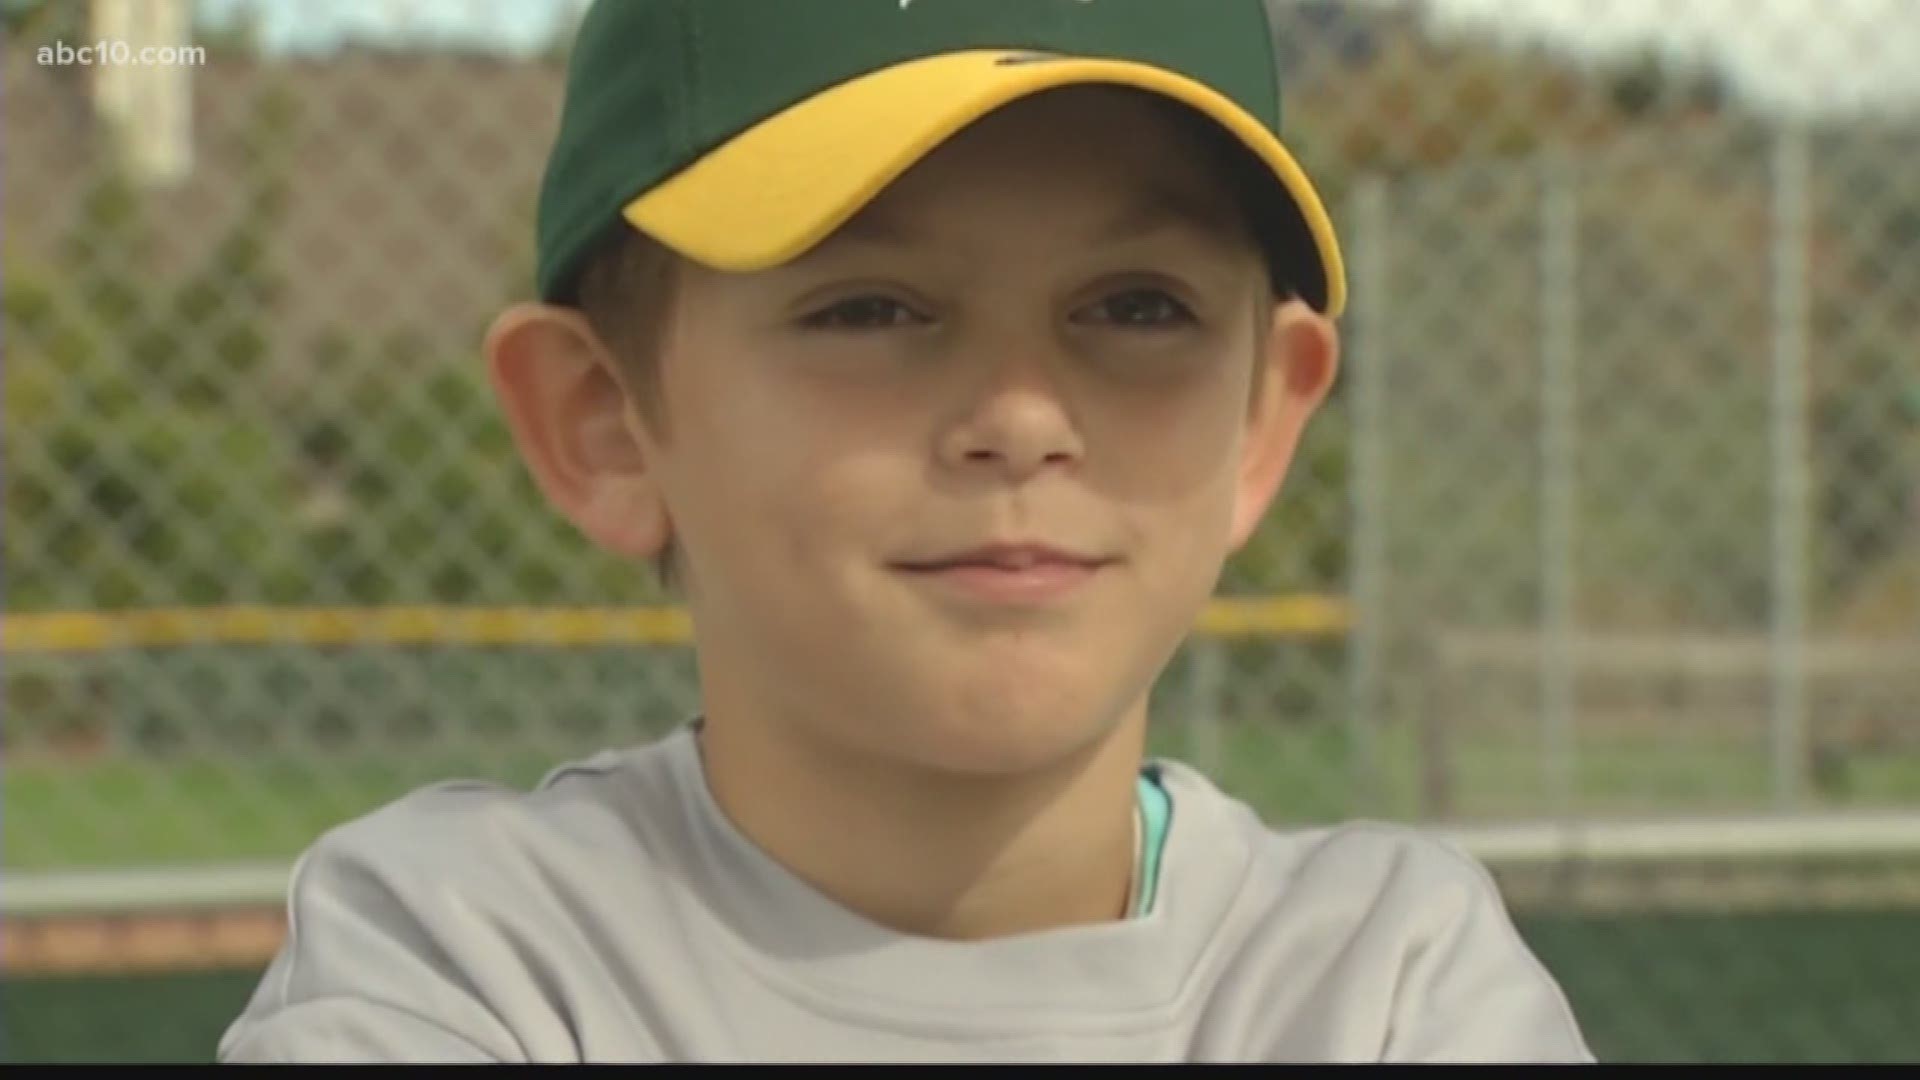 This Nine-year-old boy lost all of his as Oakland A's memorabilia in the northern California fires that affected  thousands of people. (Oct. 20, 2017)